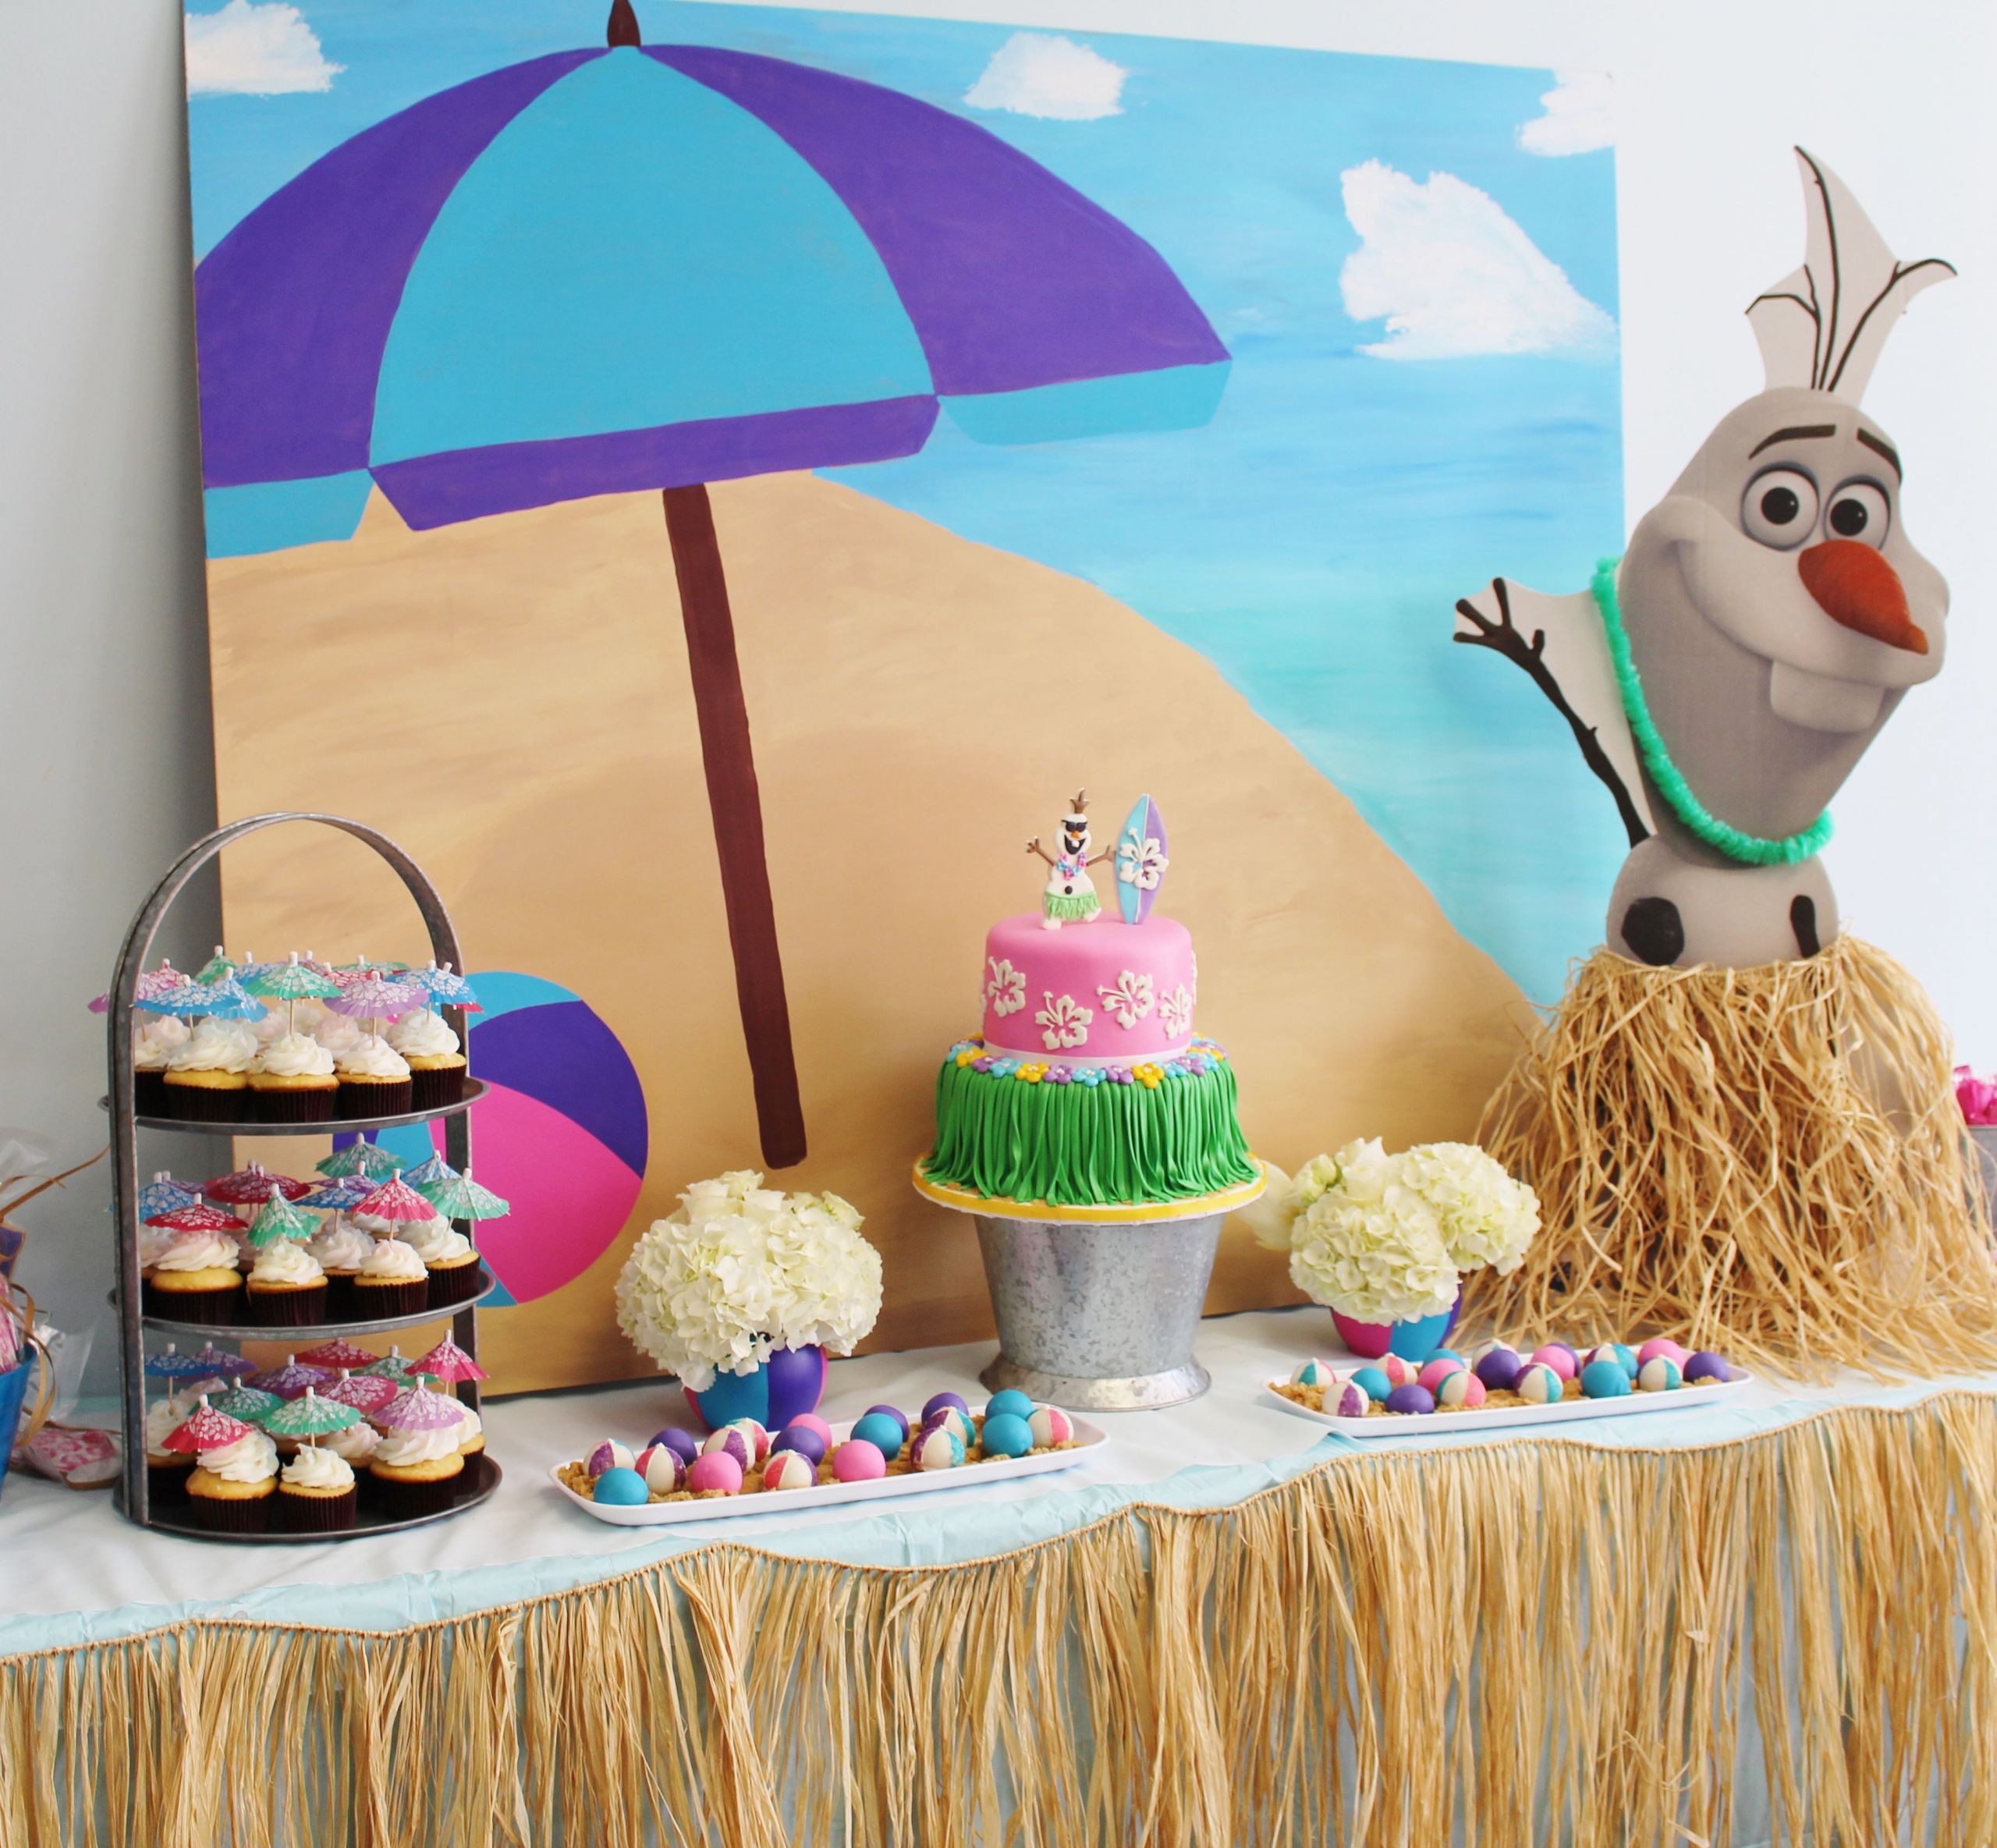 Olaf Summer Party Ideas
 Fun Frozen Party in Summer